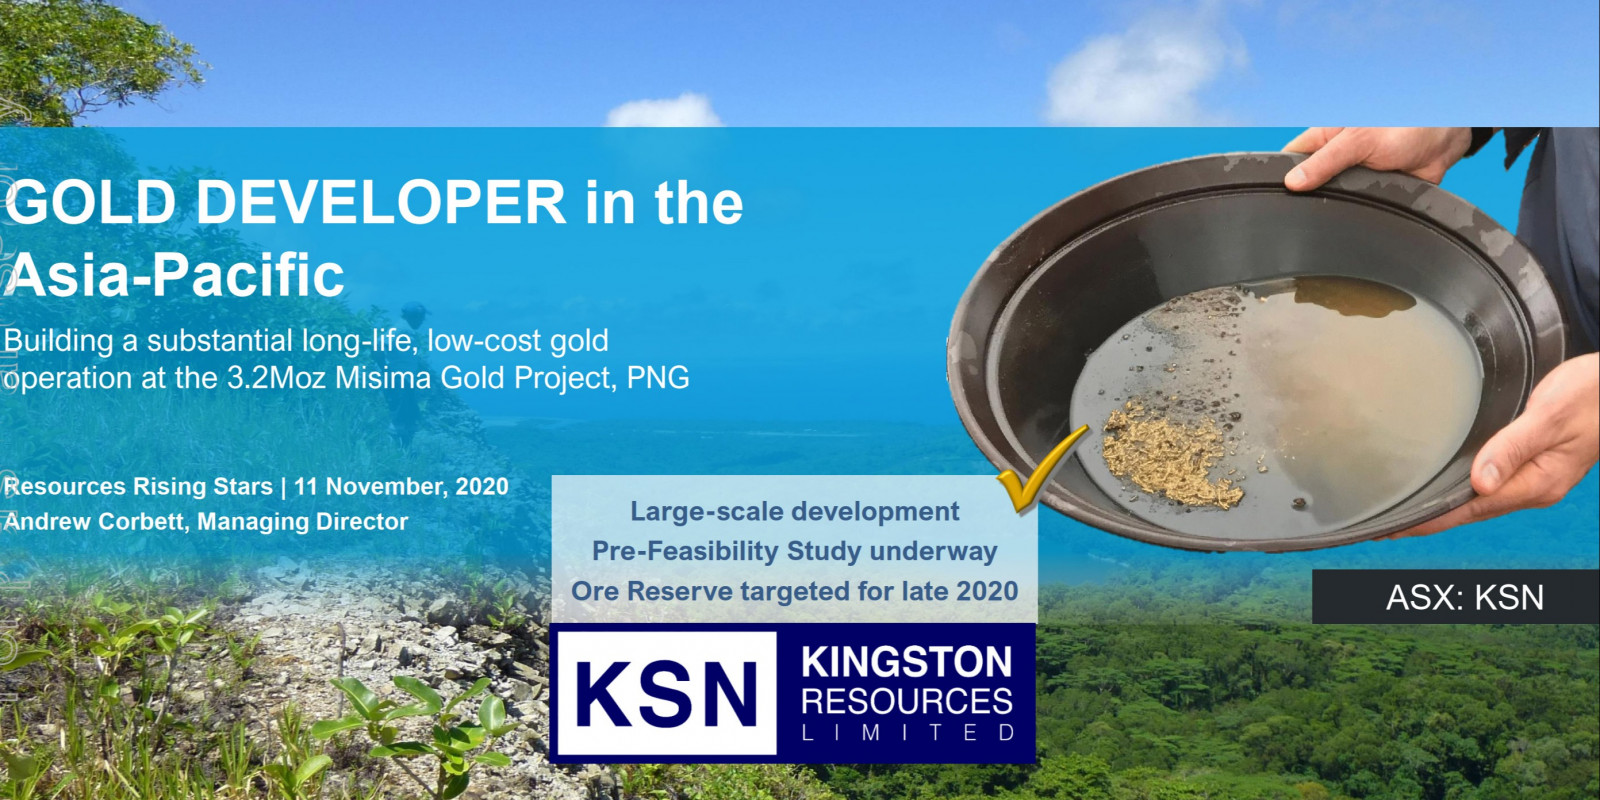 Building a substantial long-life, low-cost gold operation at the 3.2Moz Misima Gold Project, PNG